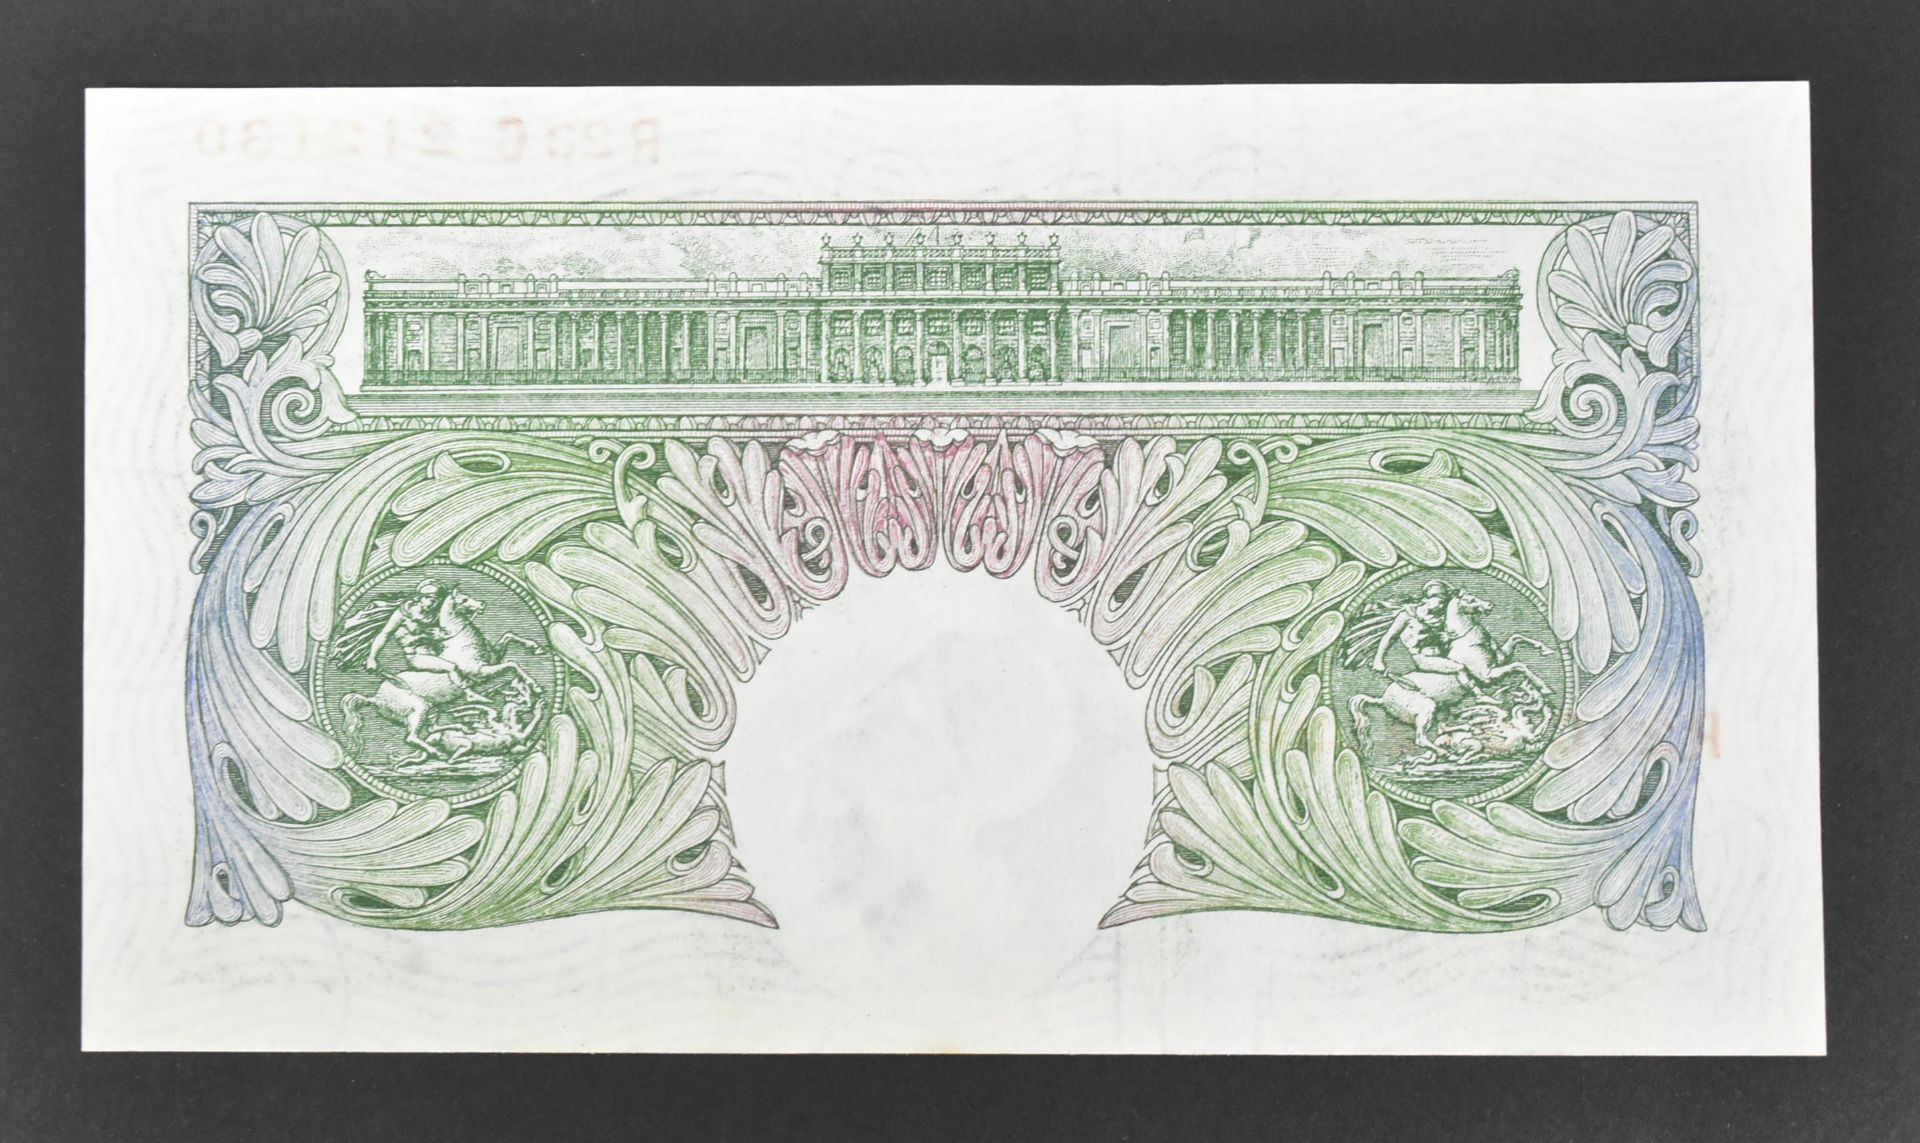 COLLECTION BRITISH UNCIRCULATED BANK NOTES - Image 53 of 61